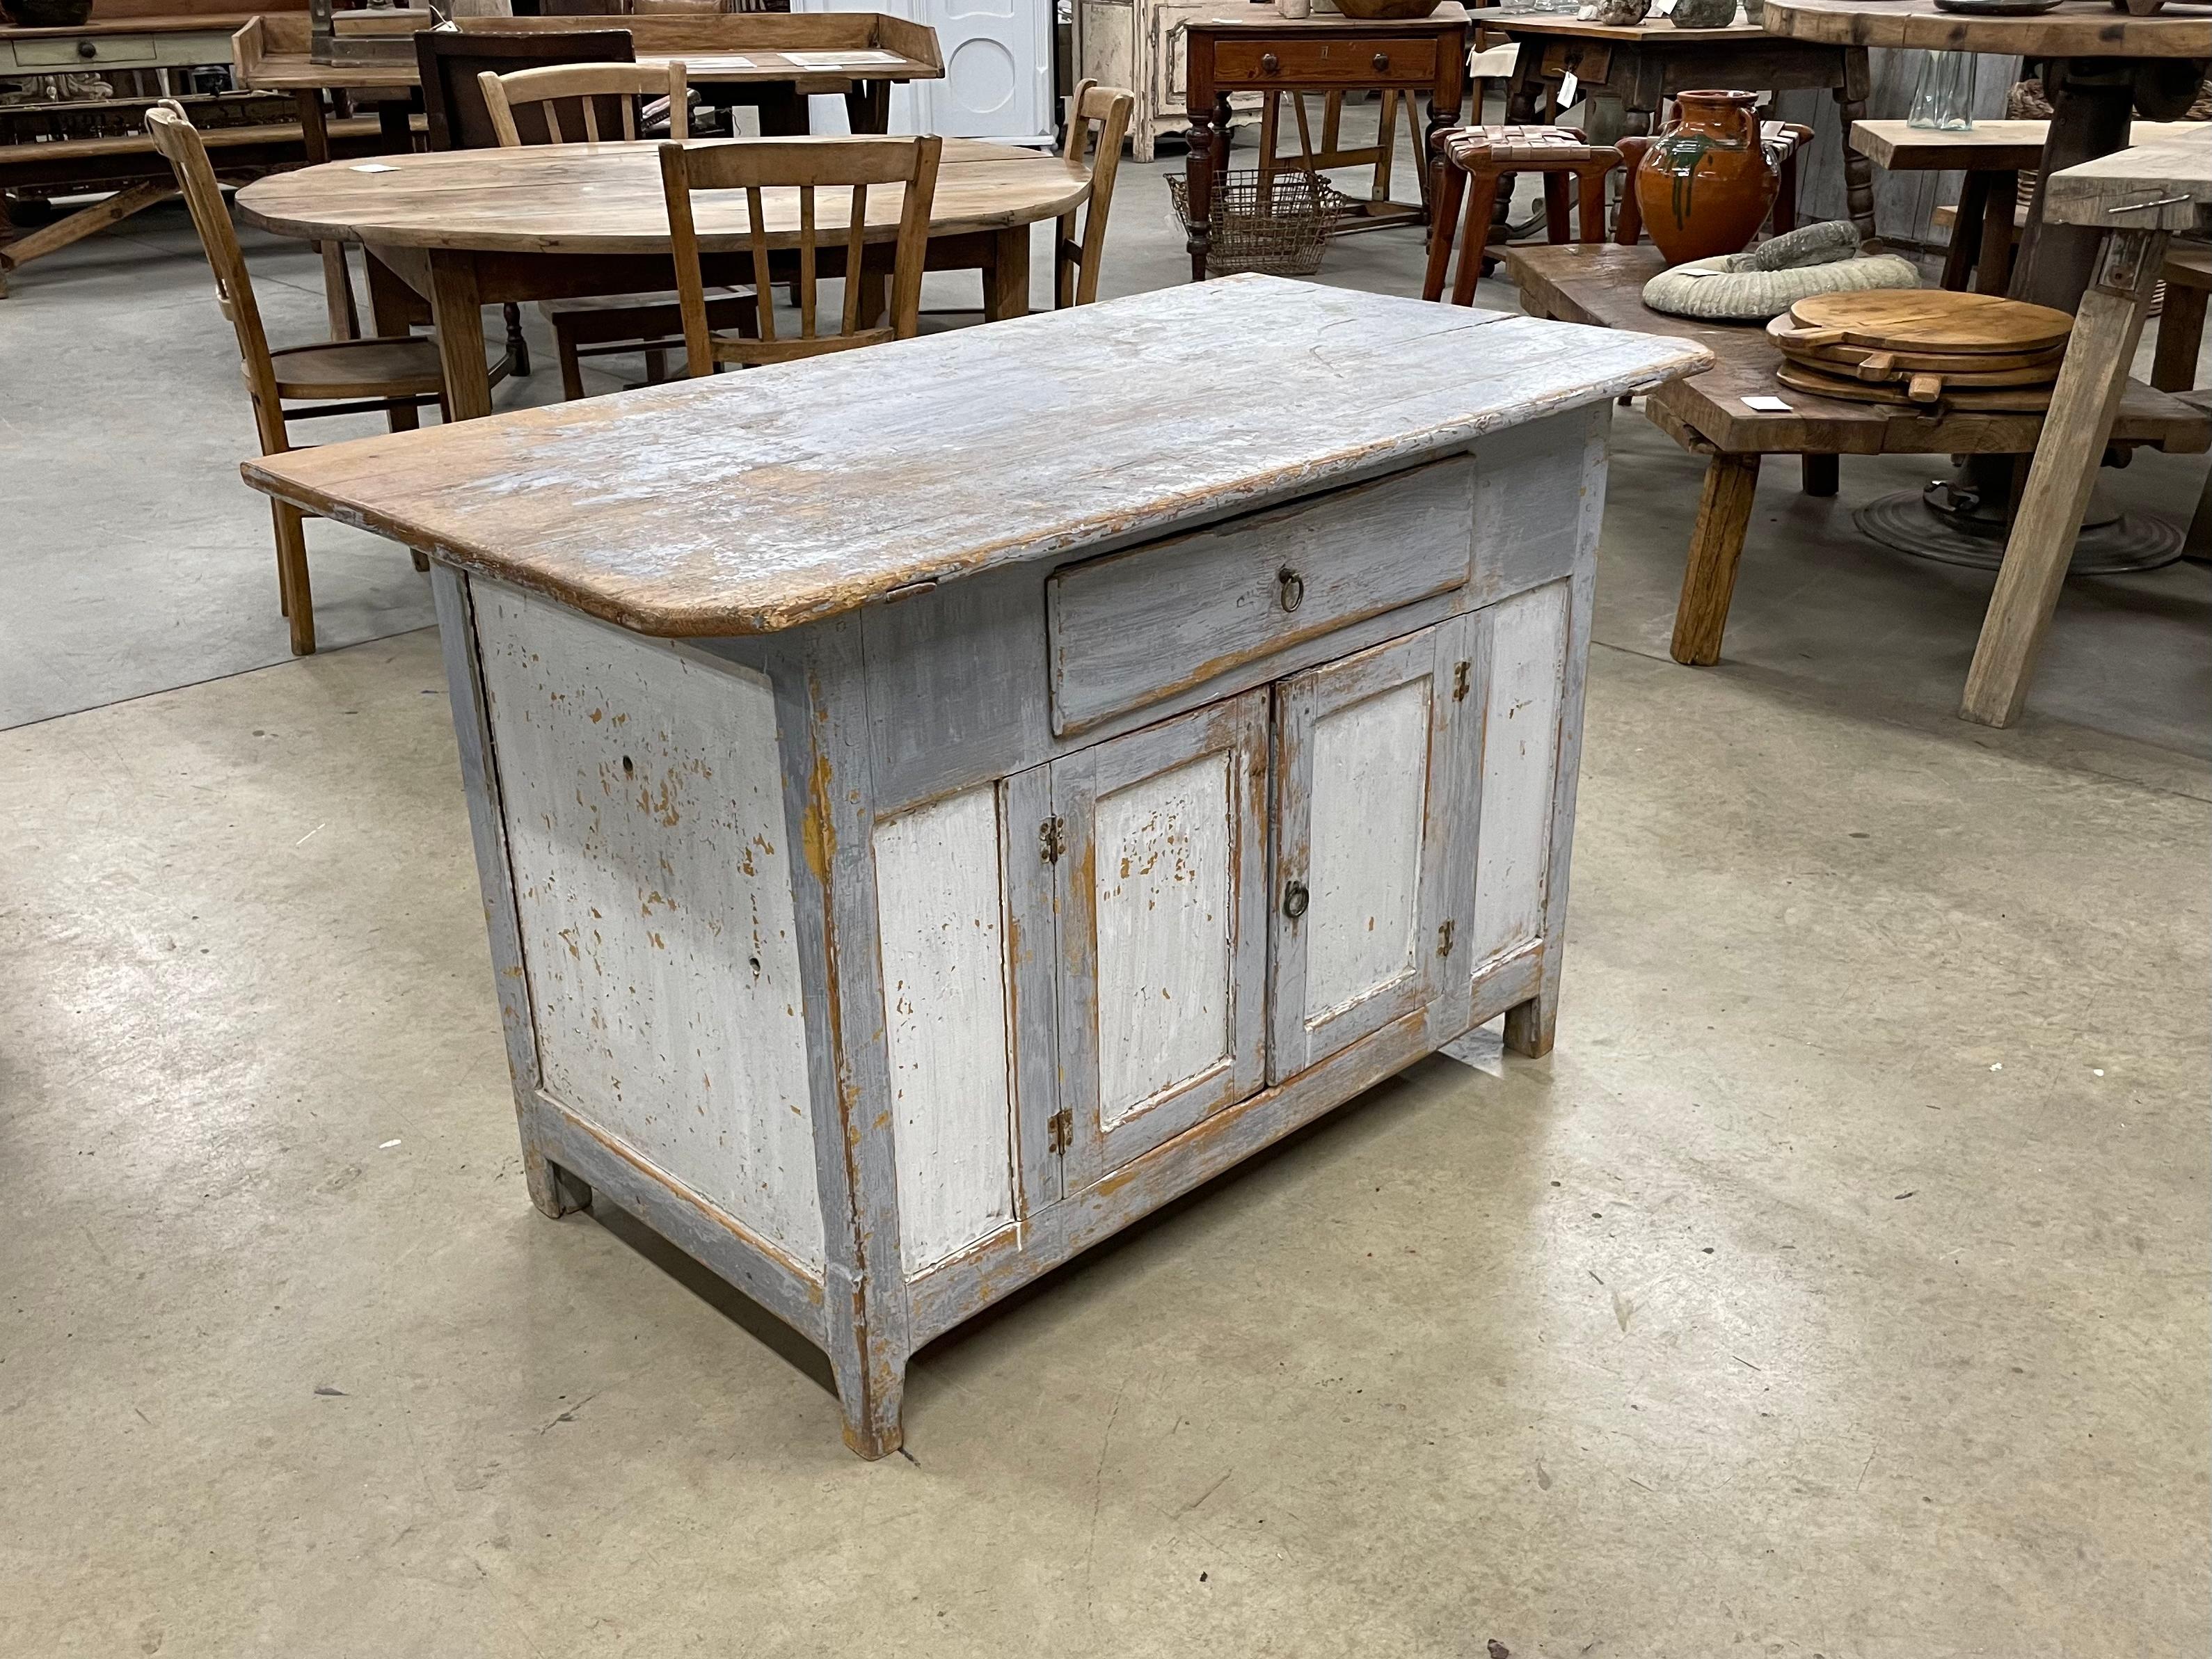 Smaller size Gustavian cupboard from Northern Sweden. This 2 door over one drawer unit has its original hardware and original pale blue and pale grey paint that has distressed beautifully over the years. 

This simplistic design is a perfect